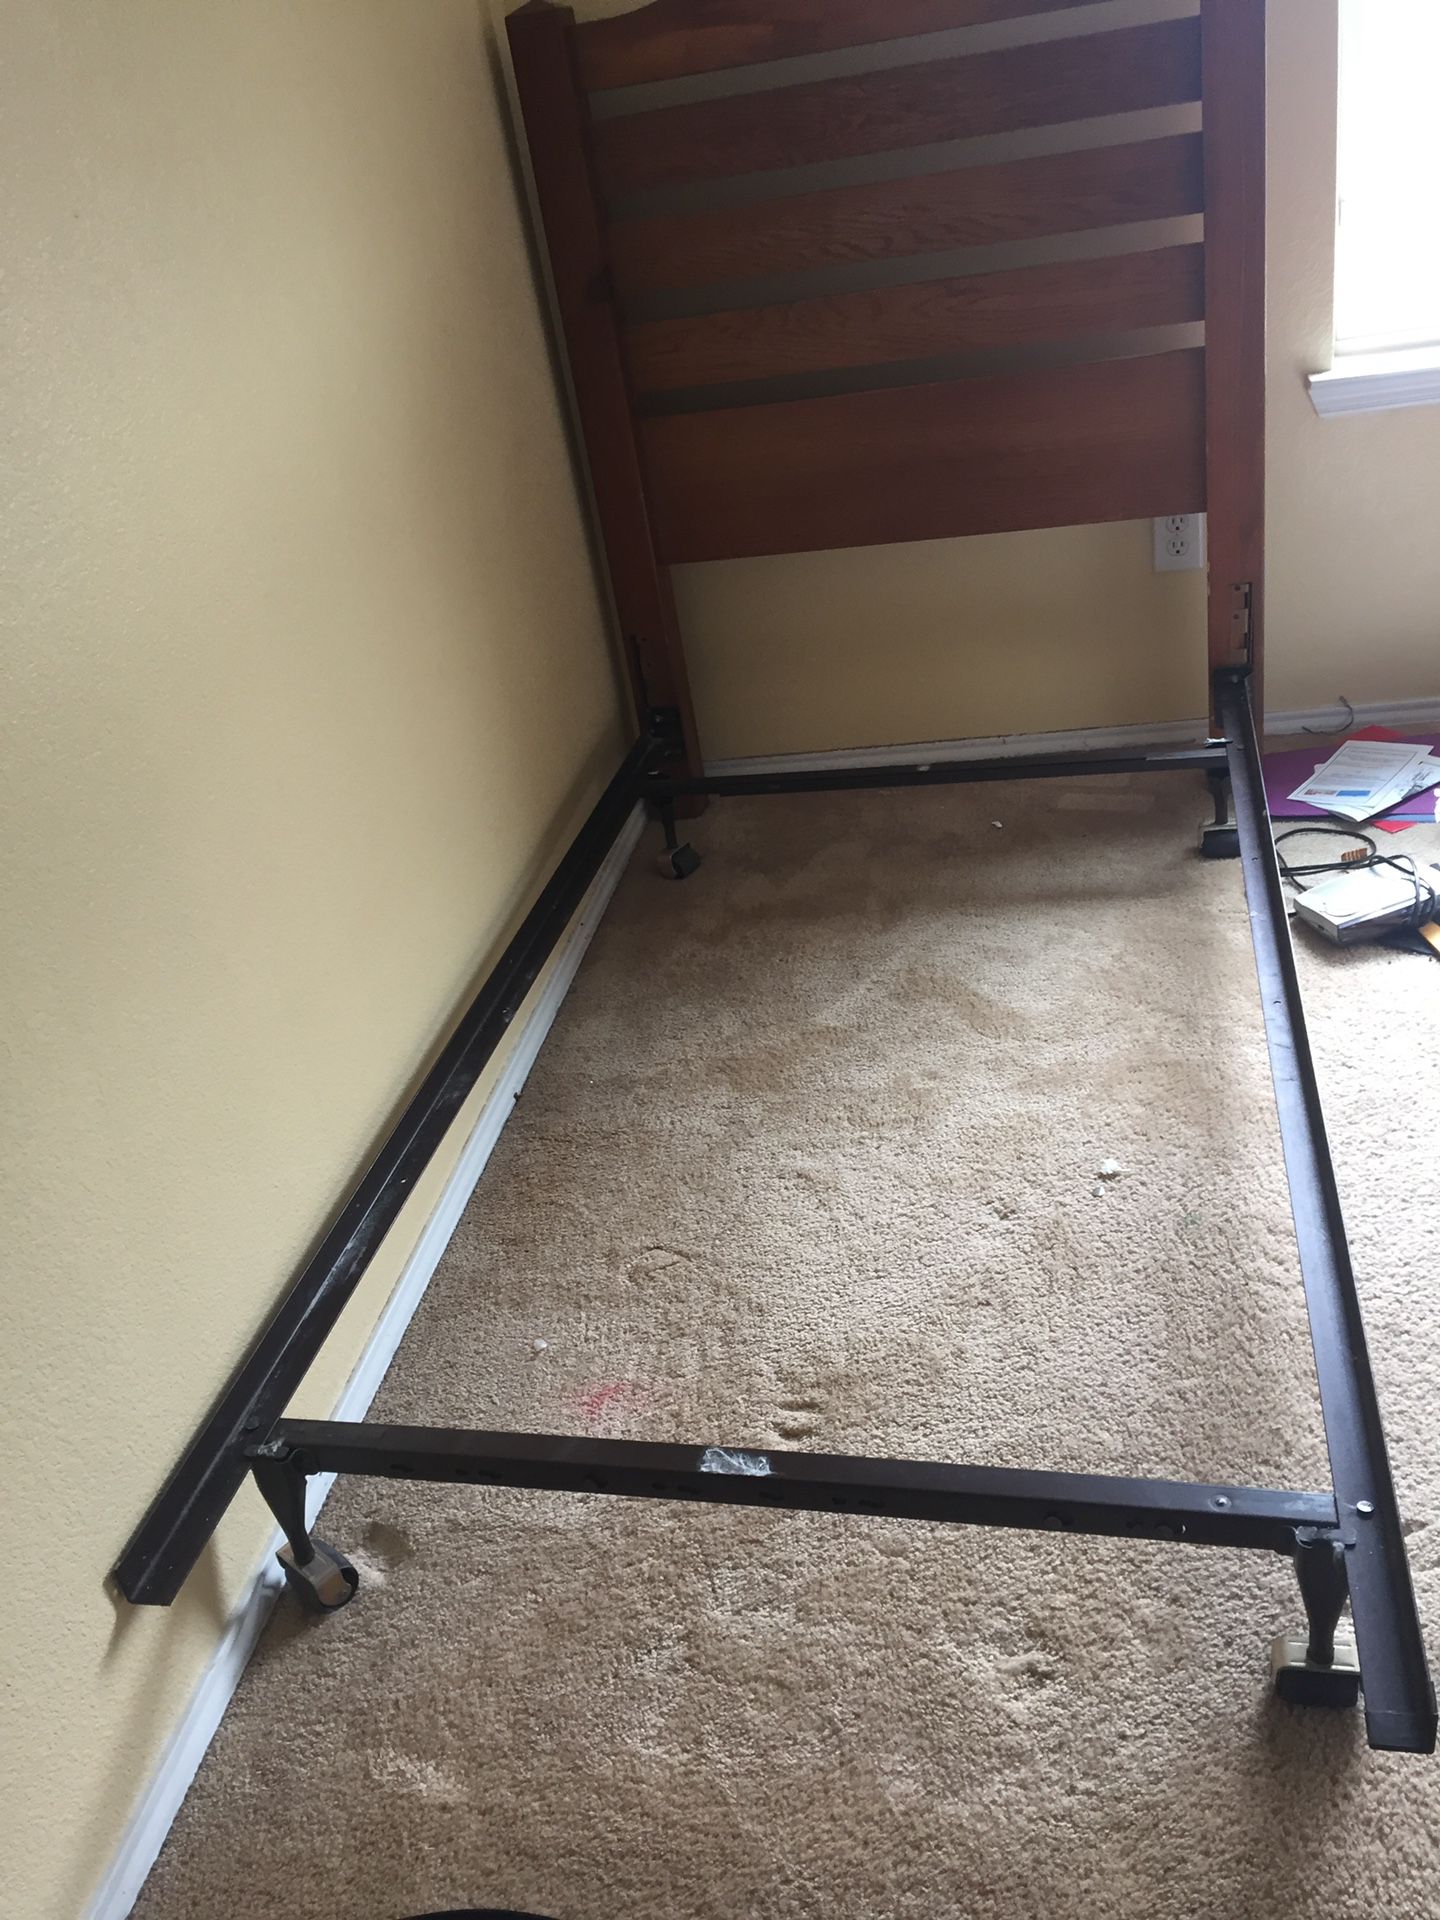 Twin size bed frame and head board